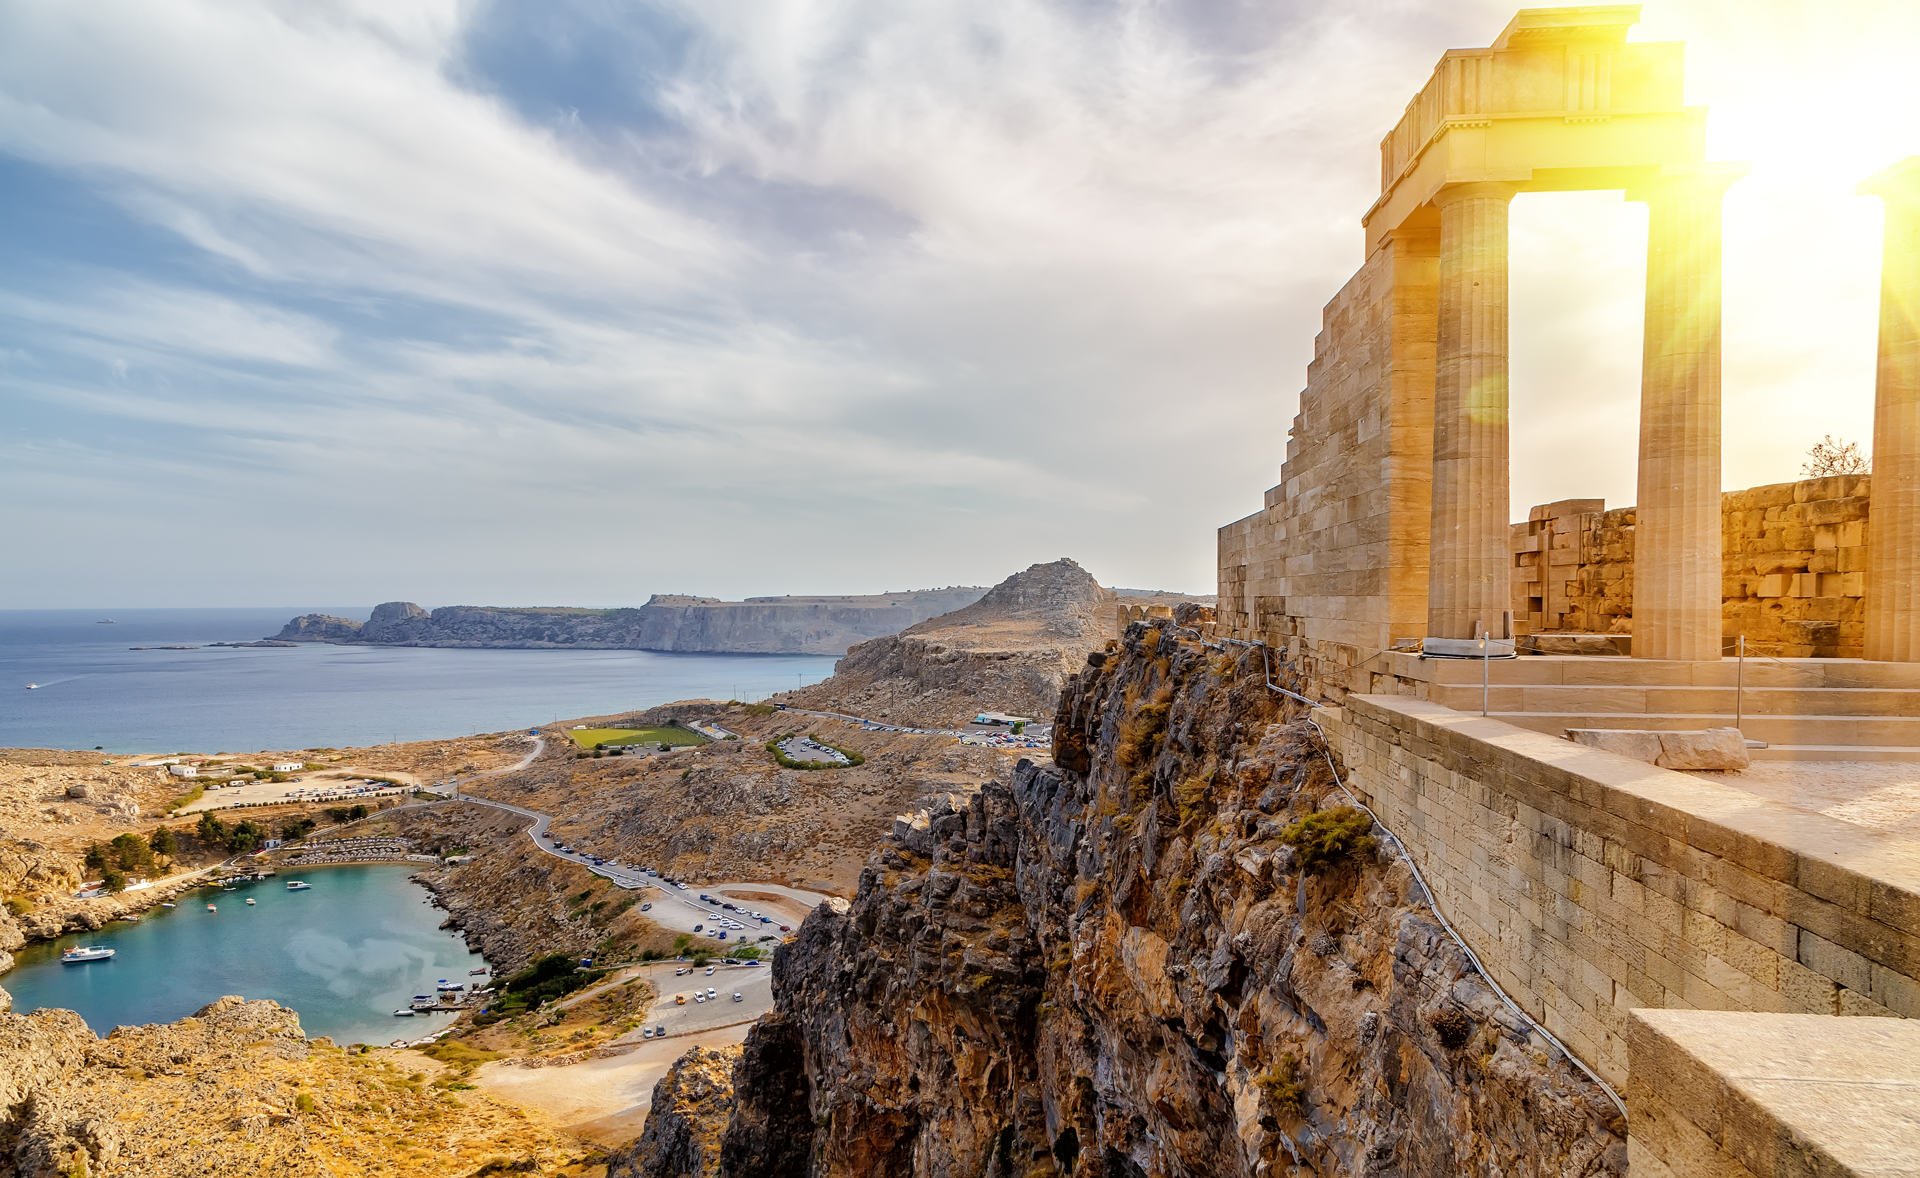 Acropolis of Lindos. Doric columns of the ancient Temple of Athena Lindia setting sun above the columns  T